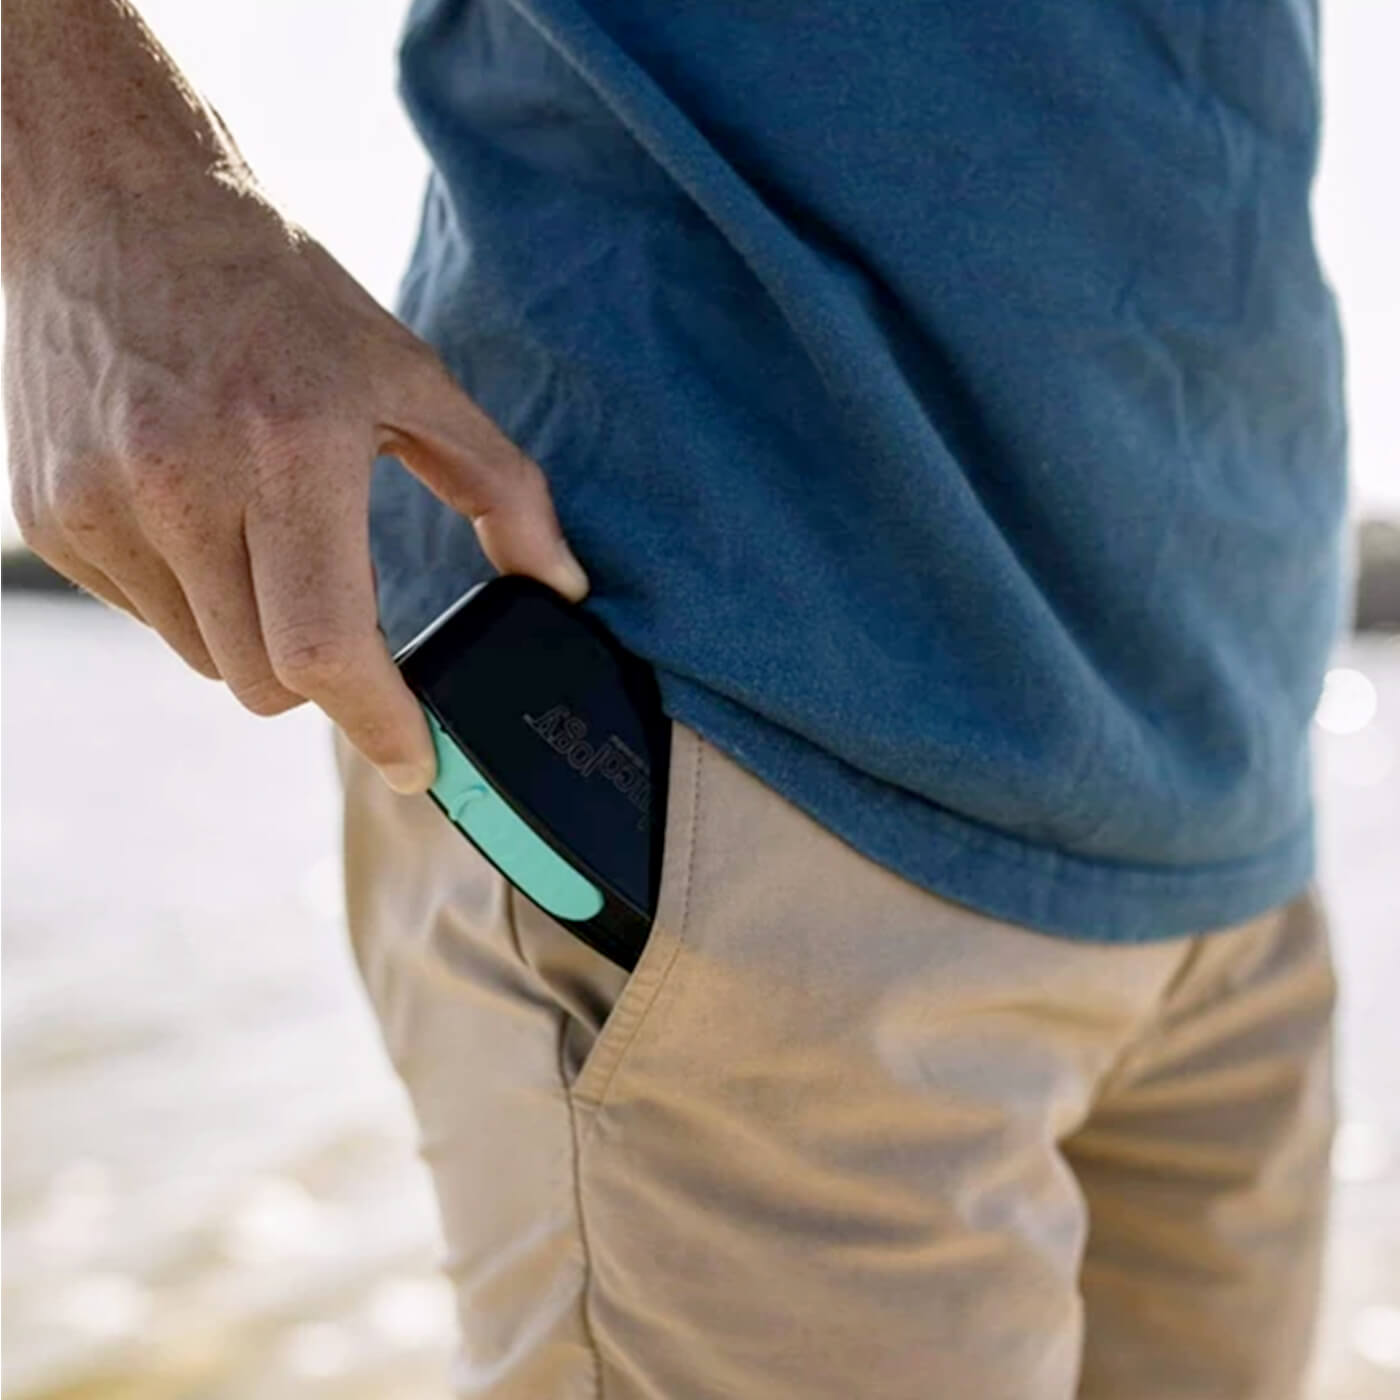 Man Putting Glucology Pen Needle Pocket Container in pants pocket.